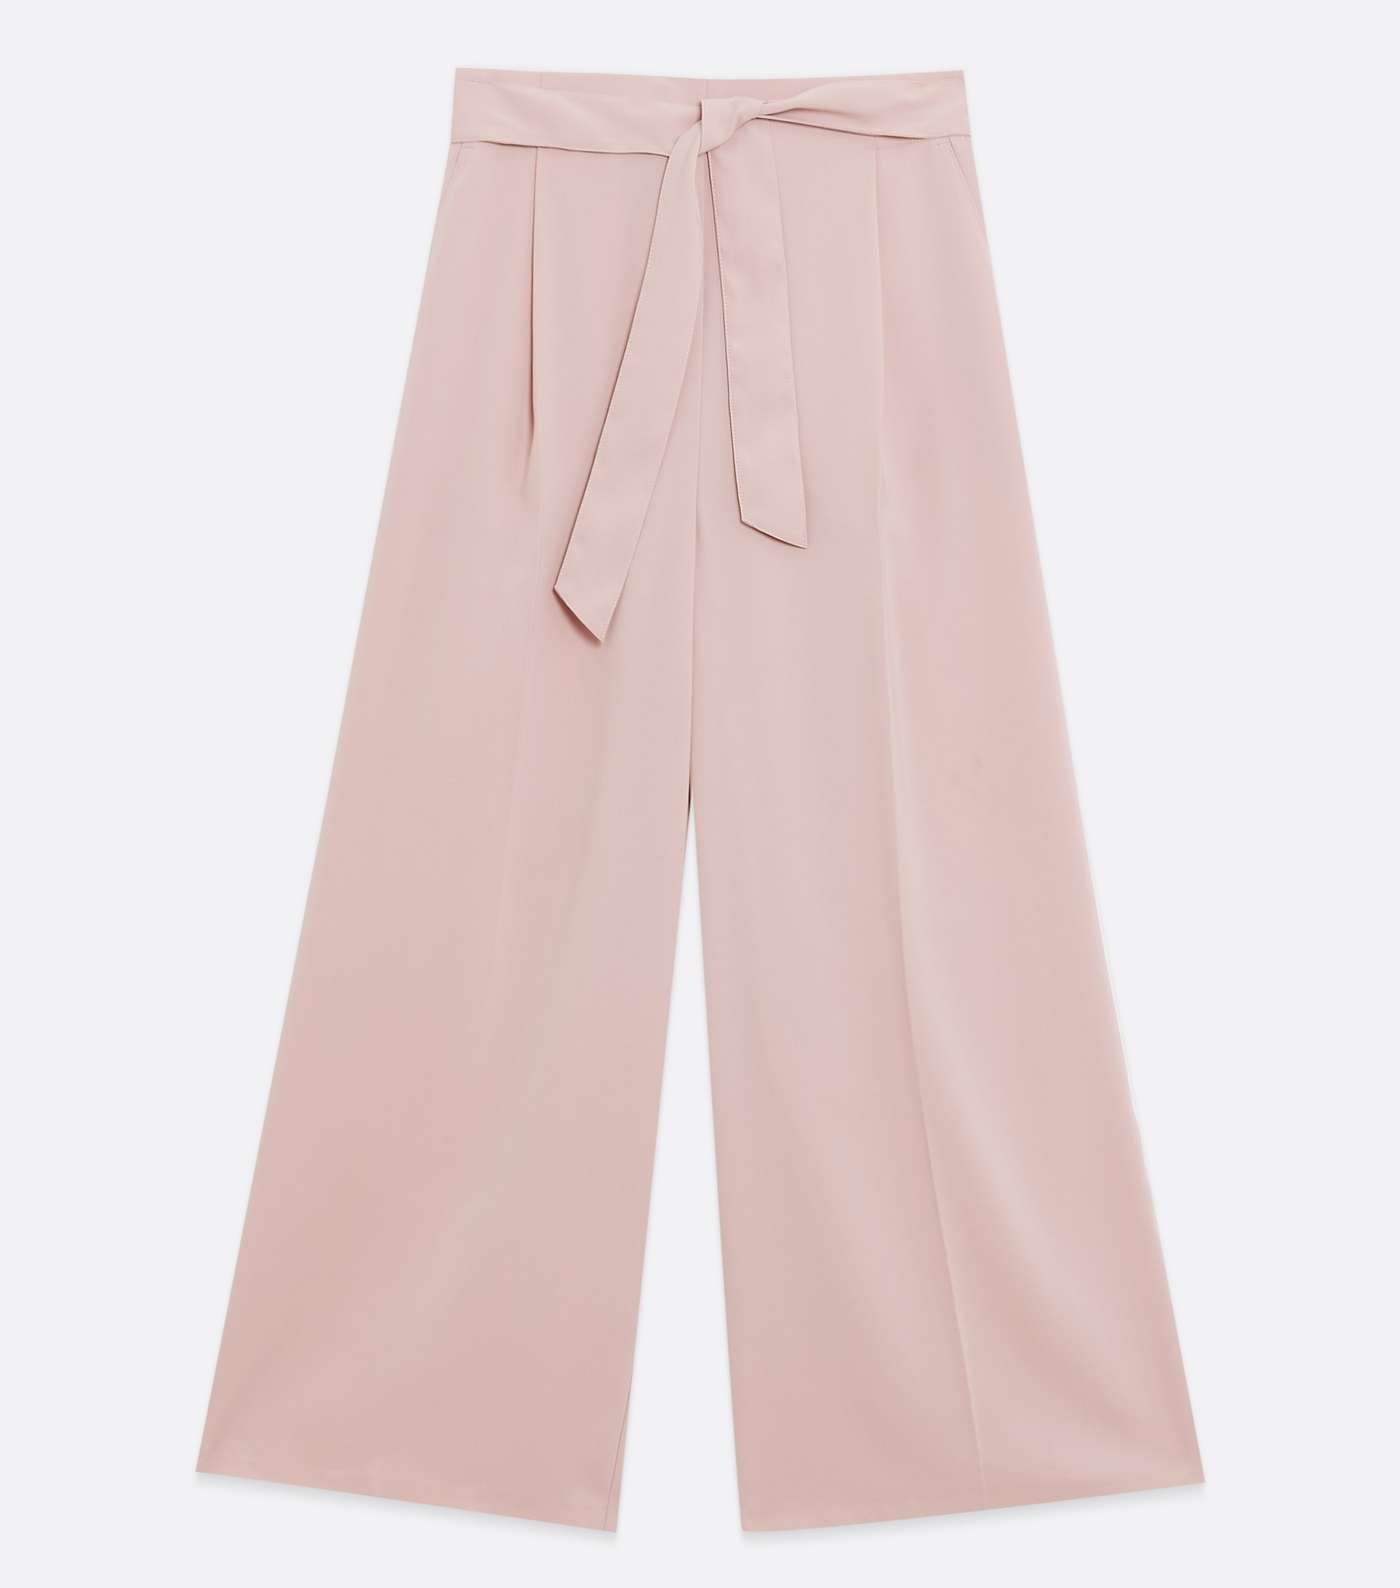 Tall Pale Pink Tie Waist Crop Trousers Image 5